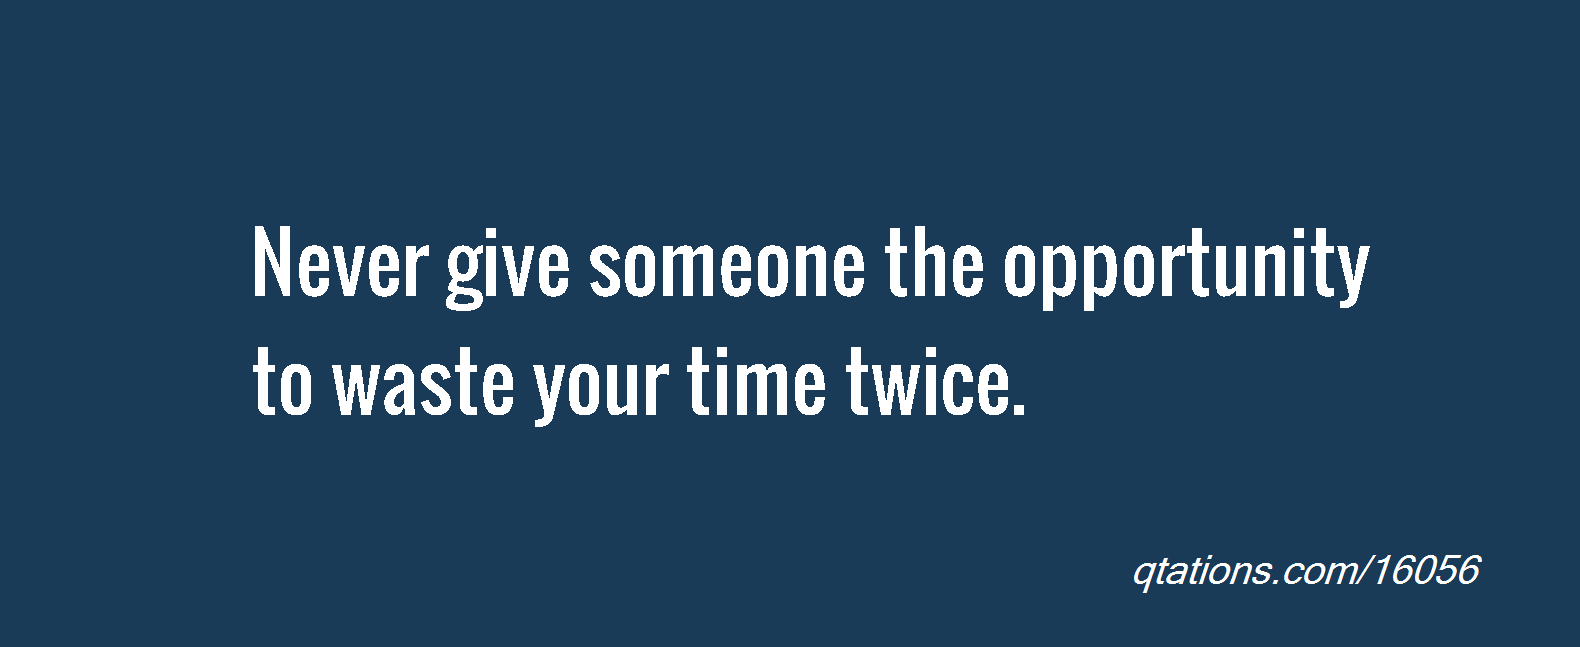 Never give someone the opportunity to waste your time twice